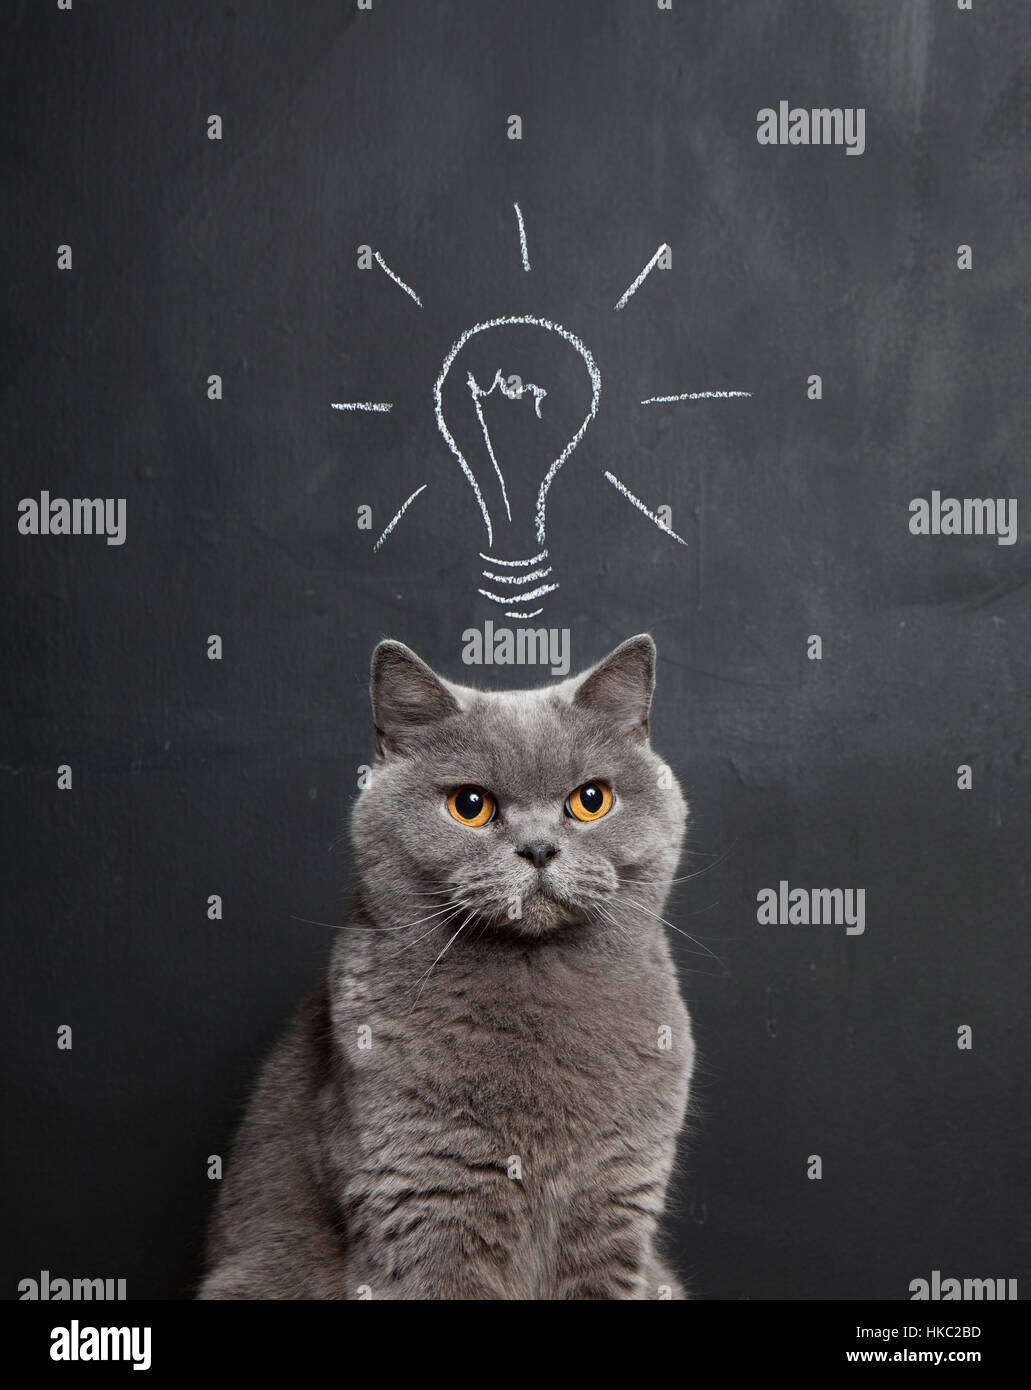 Chalk drawing of a light bulb above a grey cat. Stock Photo